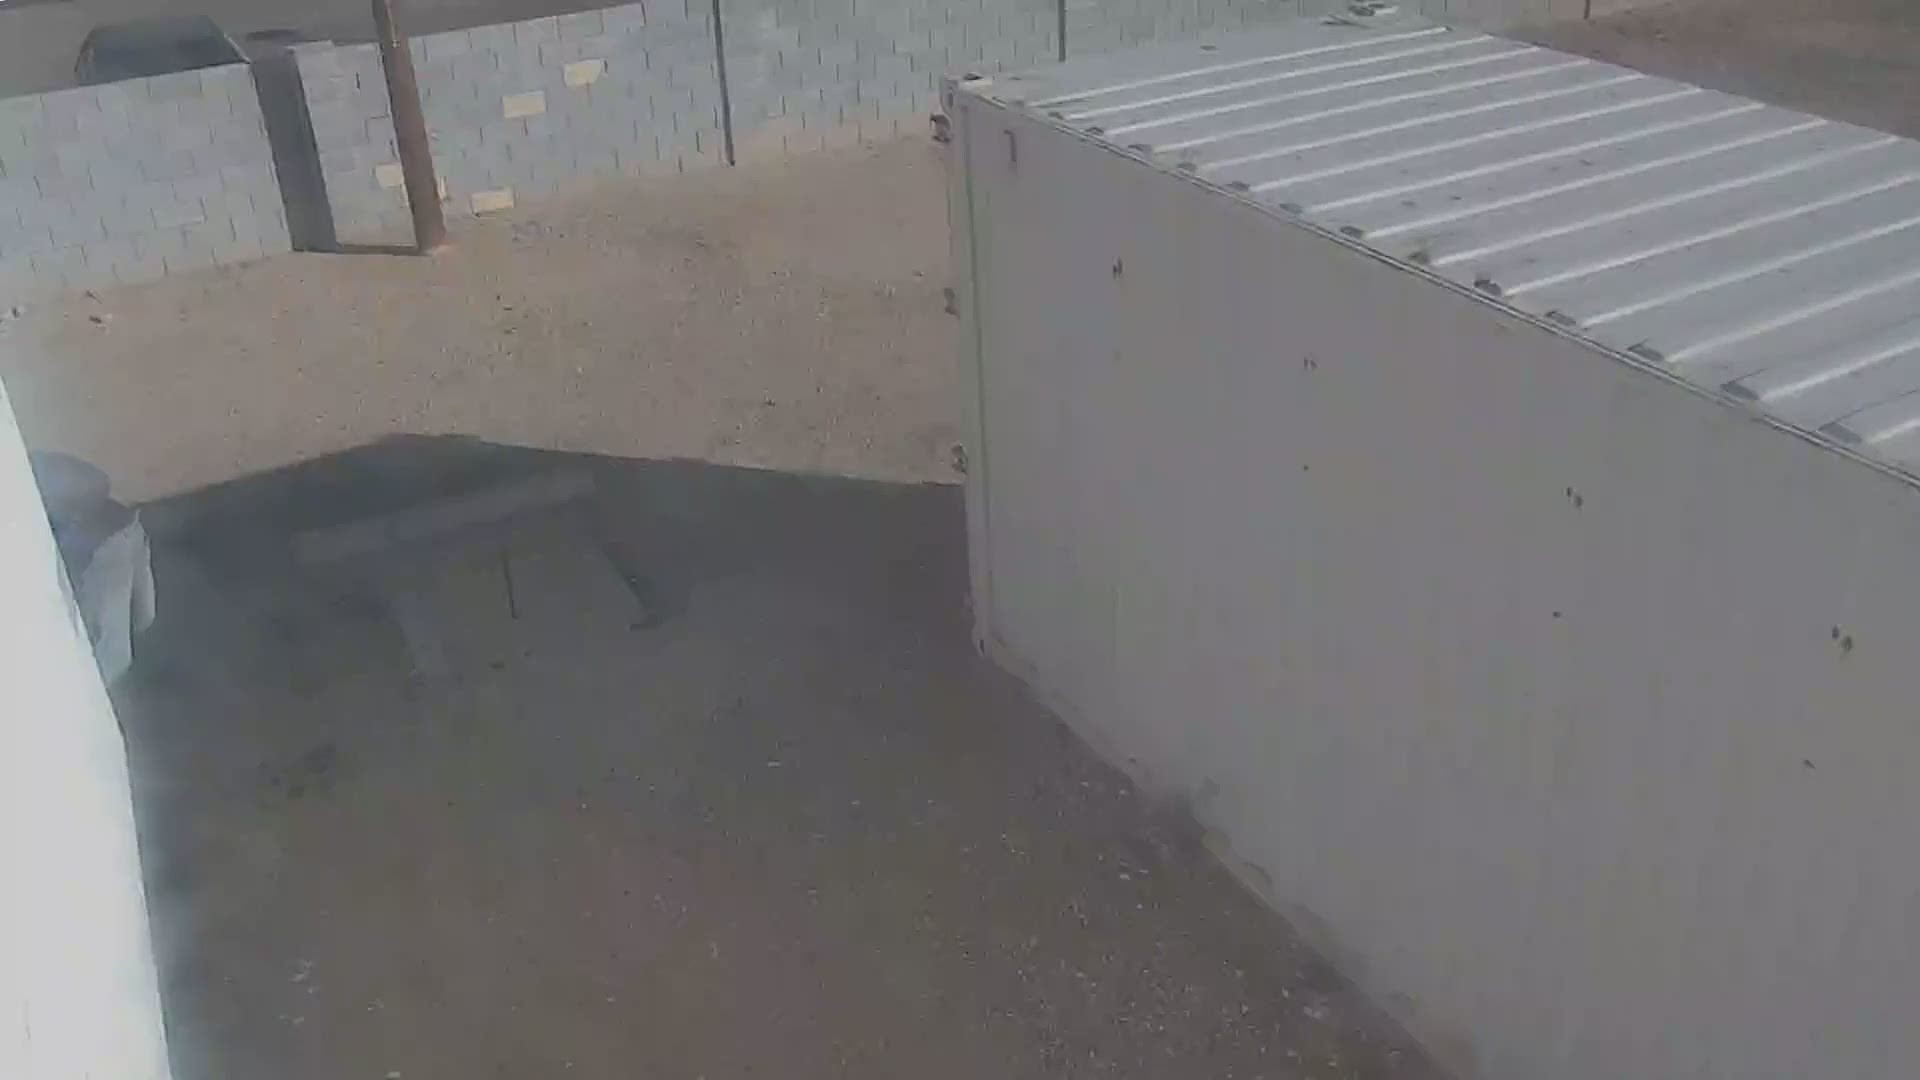 Surveillance video from Paradise Valley Silver Trowel Masonic Lodge shows a person destroying a cornerstone and removing it from the building.